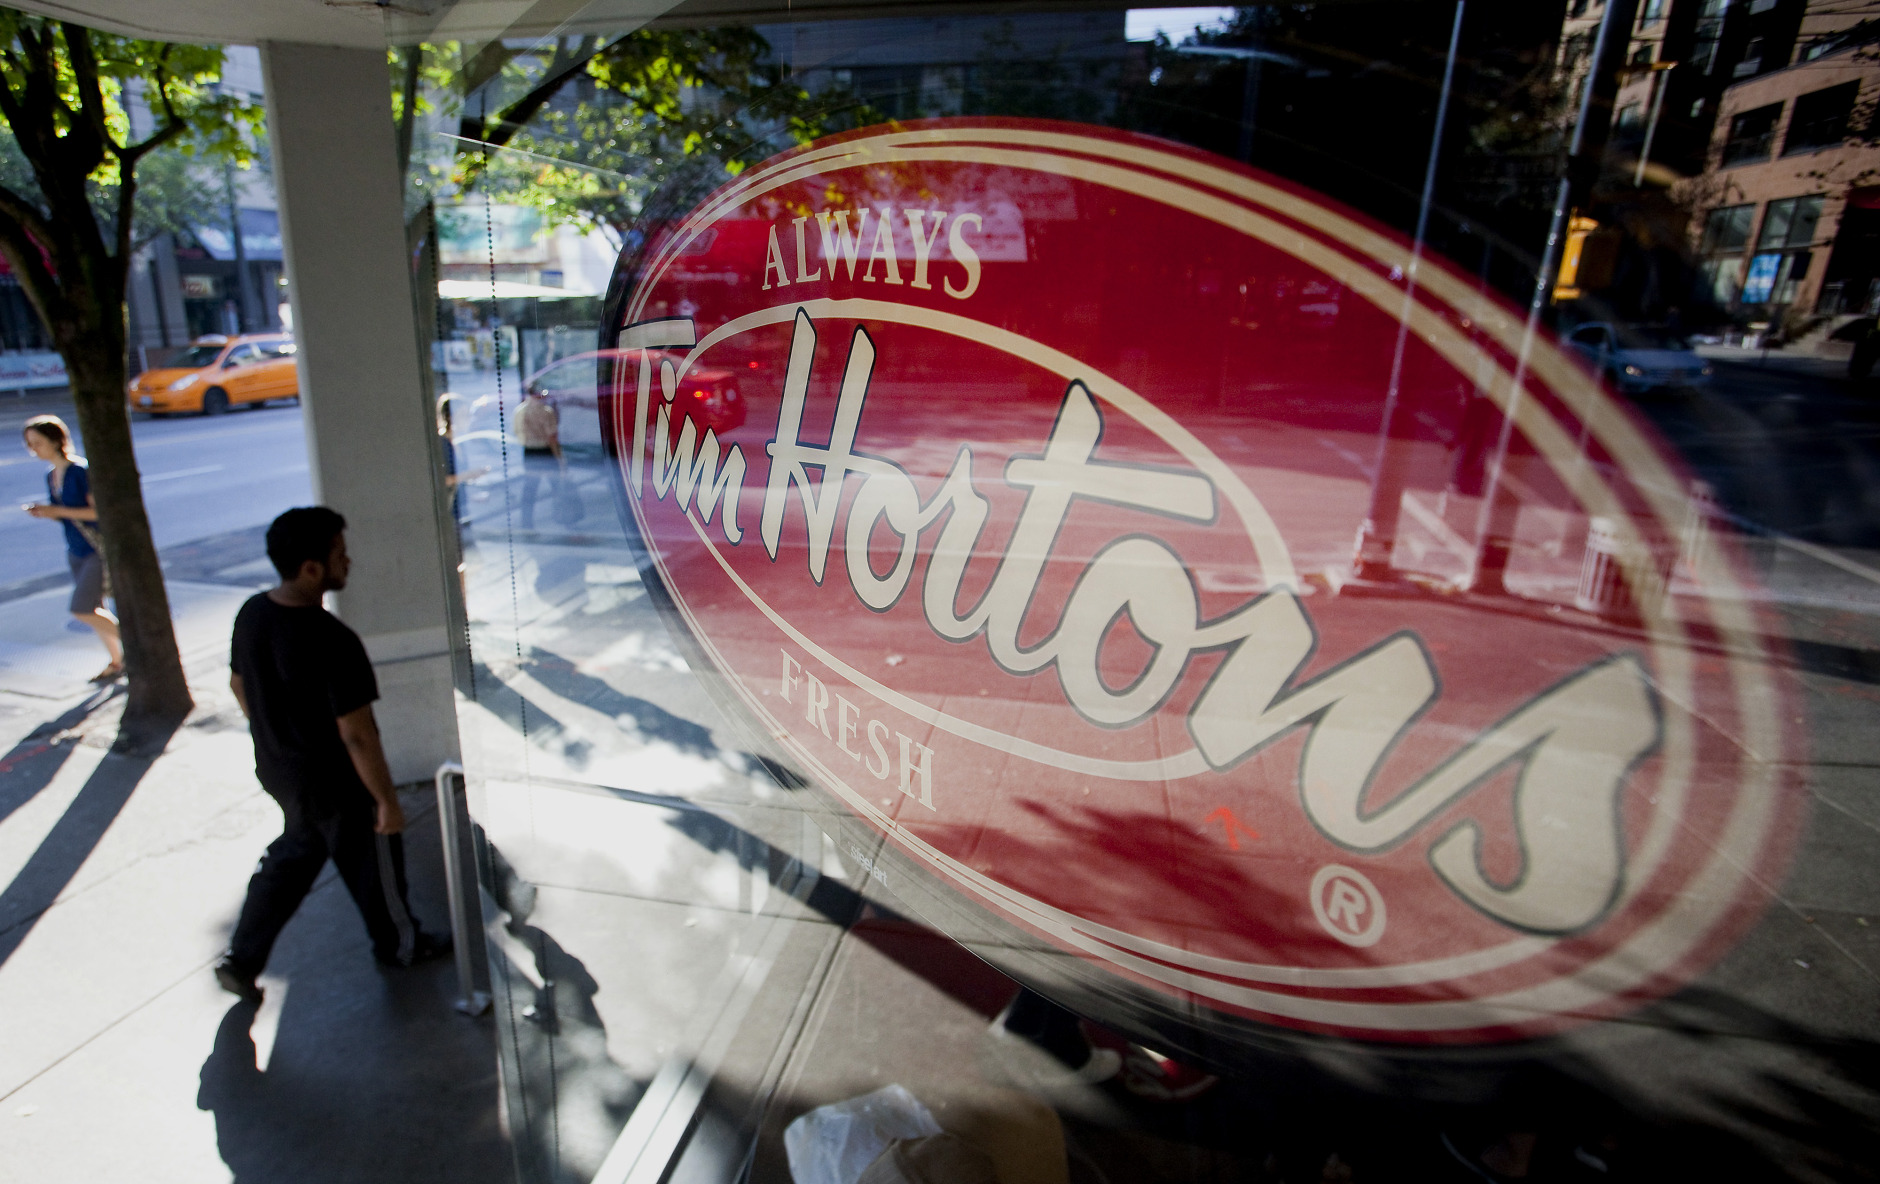 Tim Hortons pulls Beyond Meat products from Ontario, British Columbia